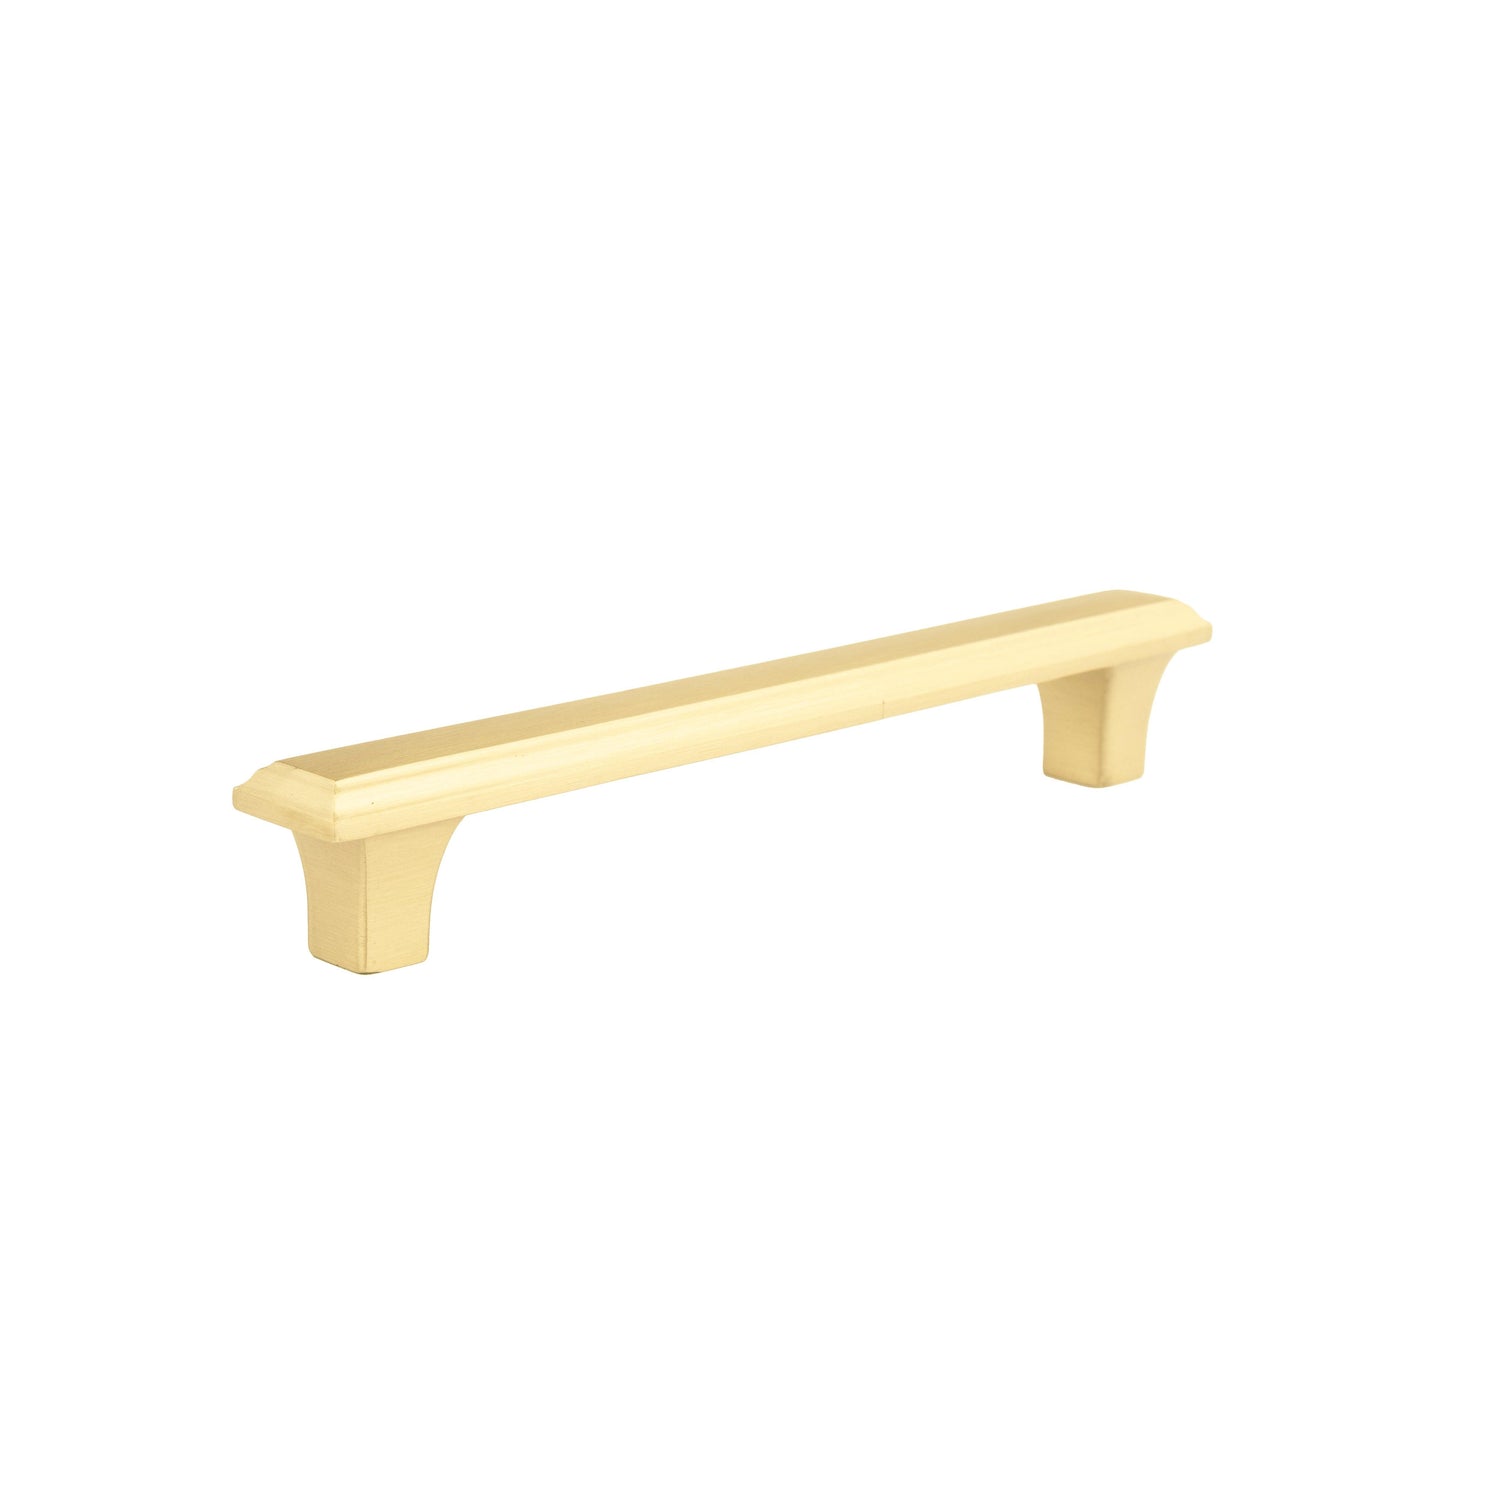 Alaric Handle Handles 152mm / Gold / Brass - M A N T A R A